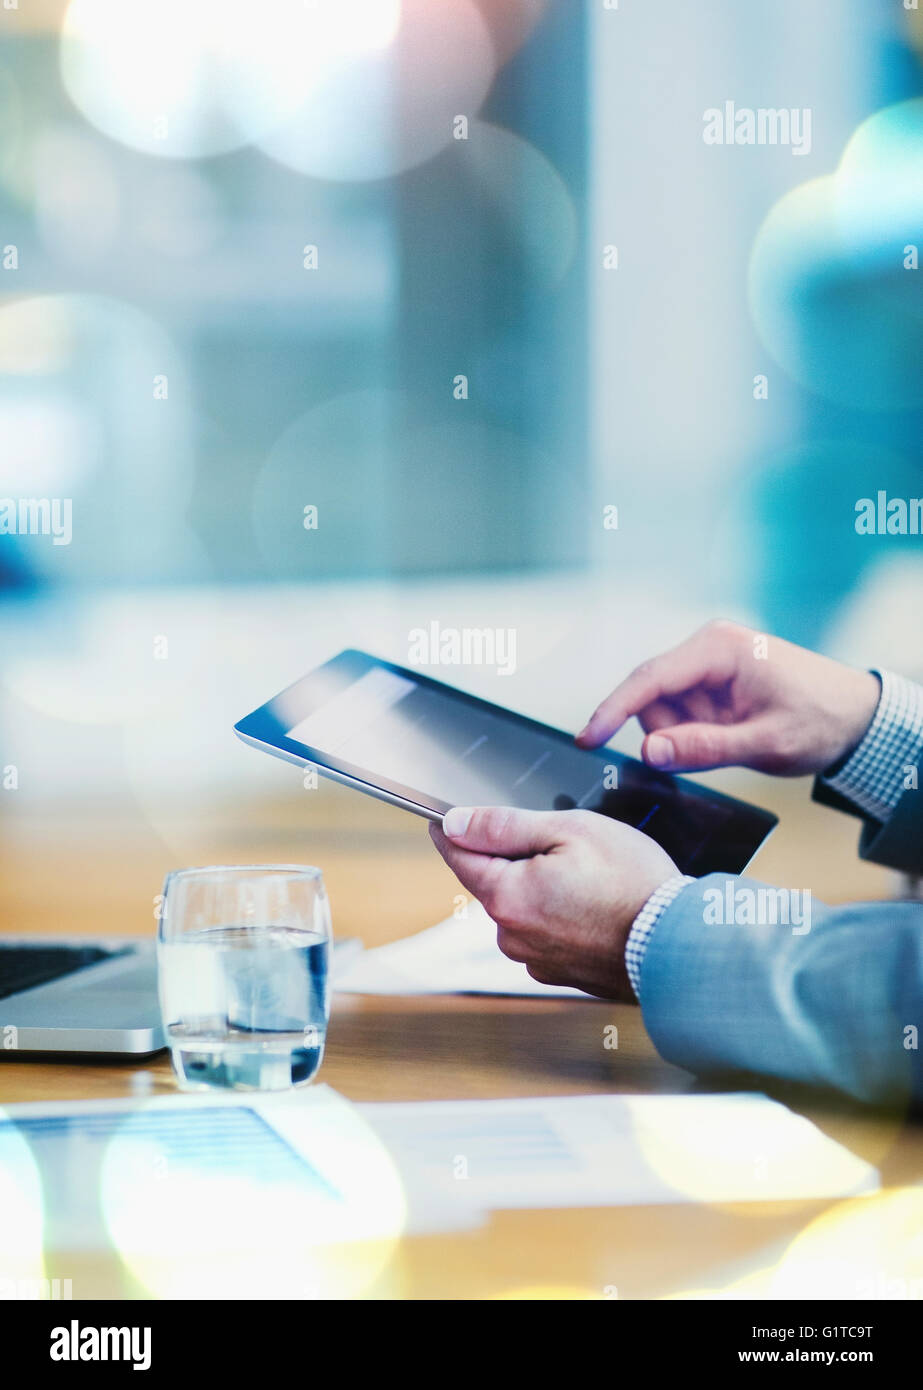 Businessman using digital tablet at conference table Stock Photo